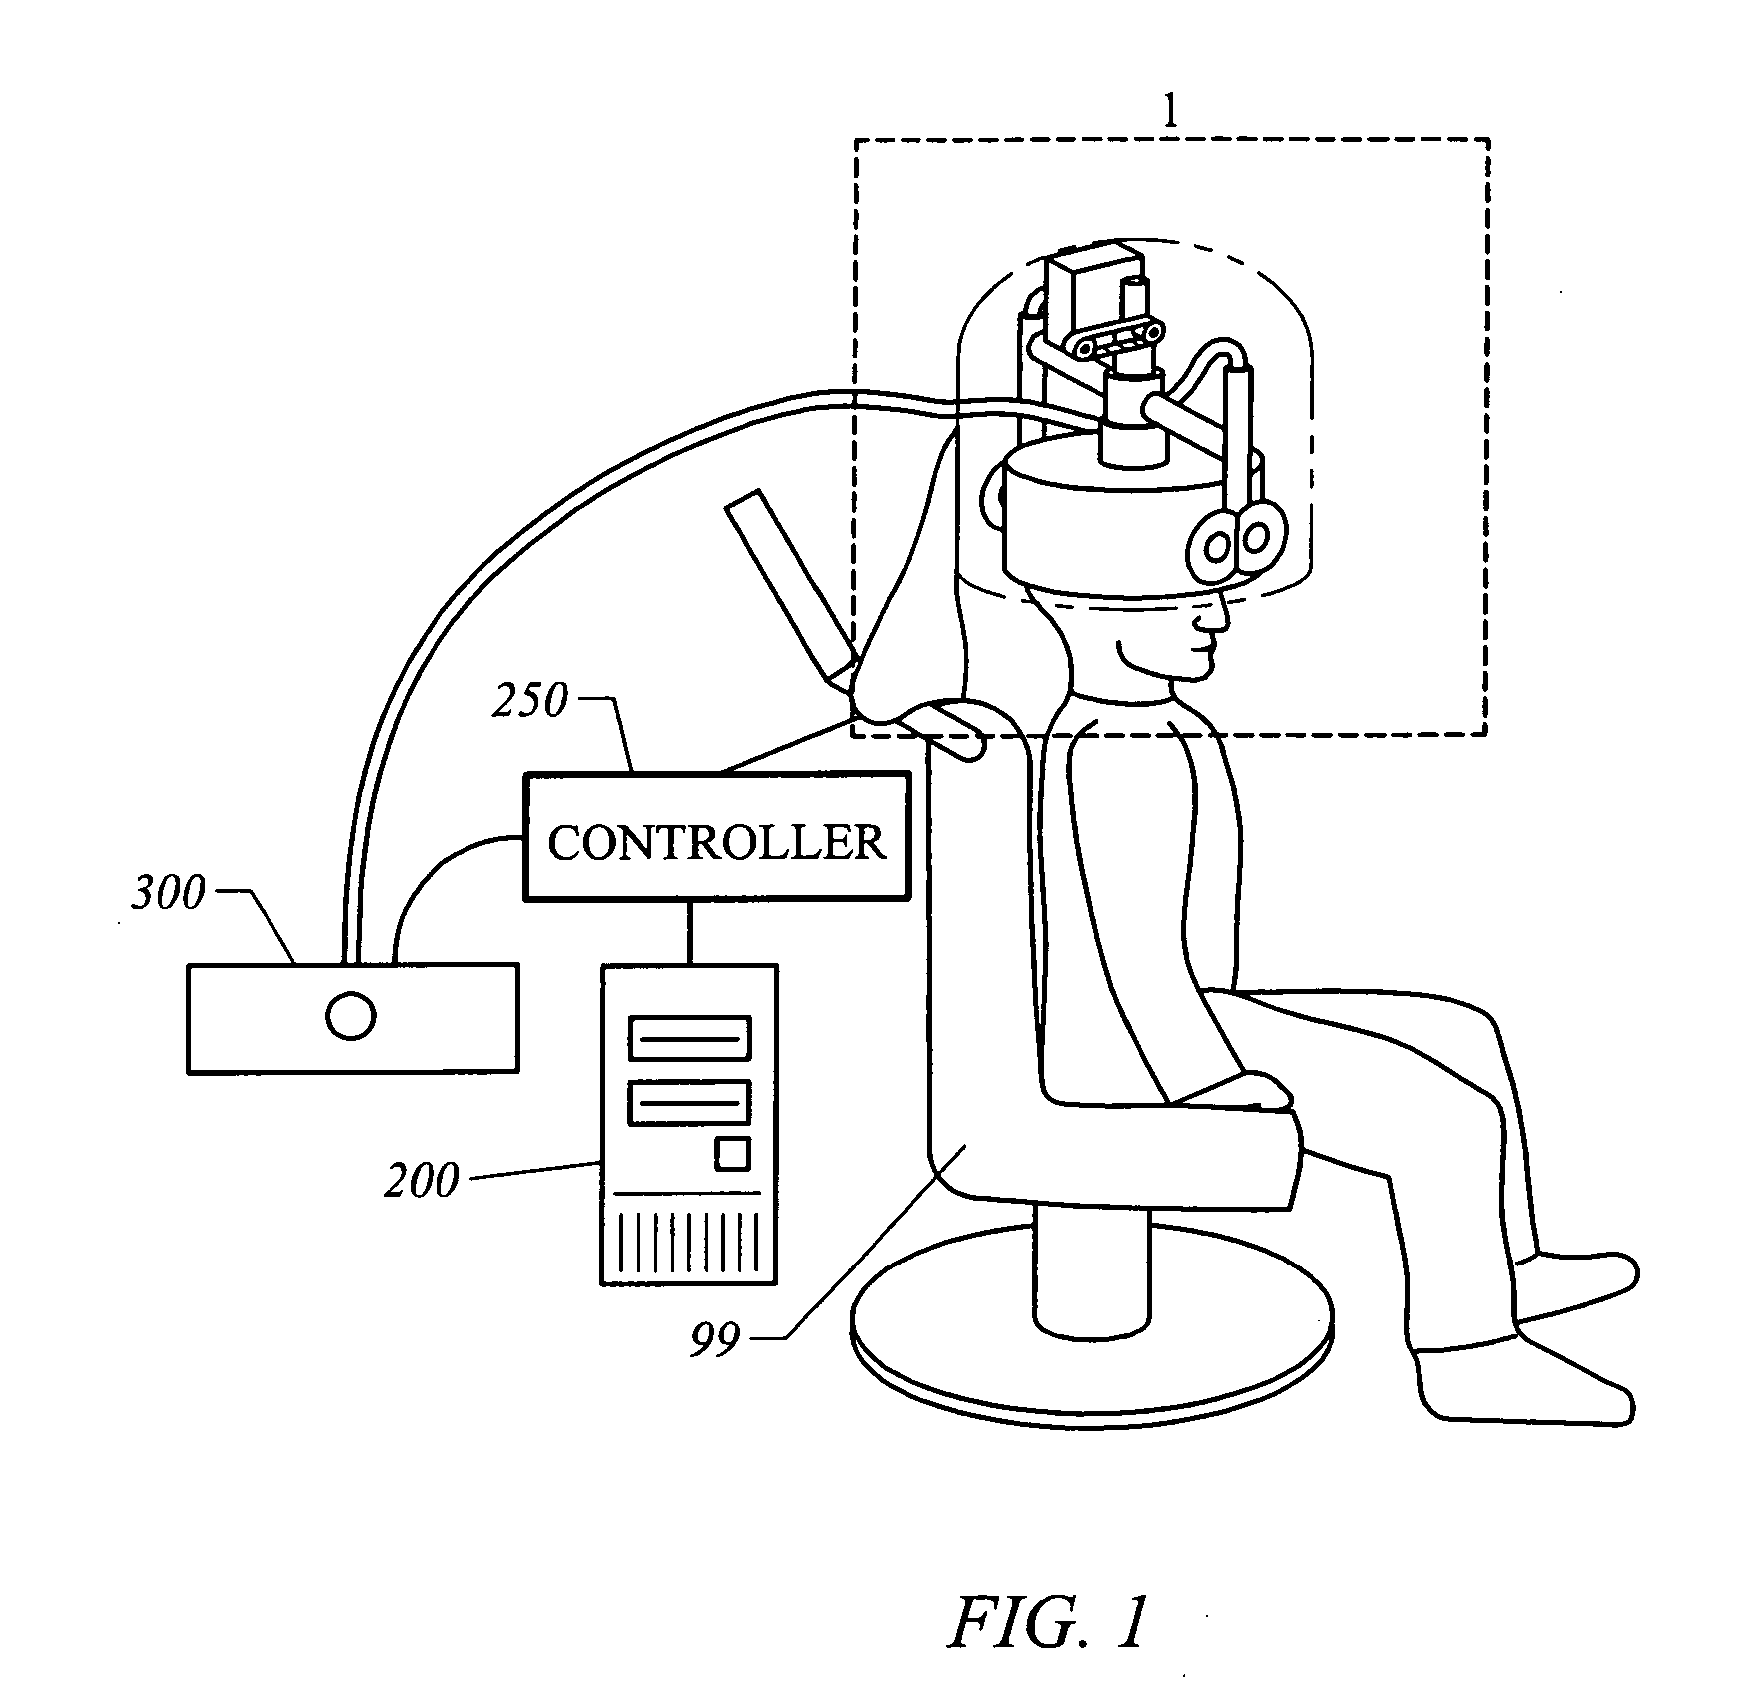 Robotic apparatus for targeting and producing deep, focused transcranial magnetic stimulation